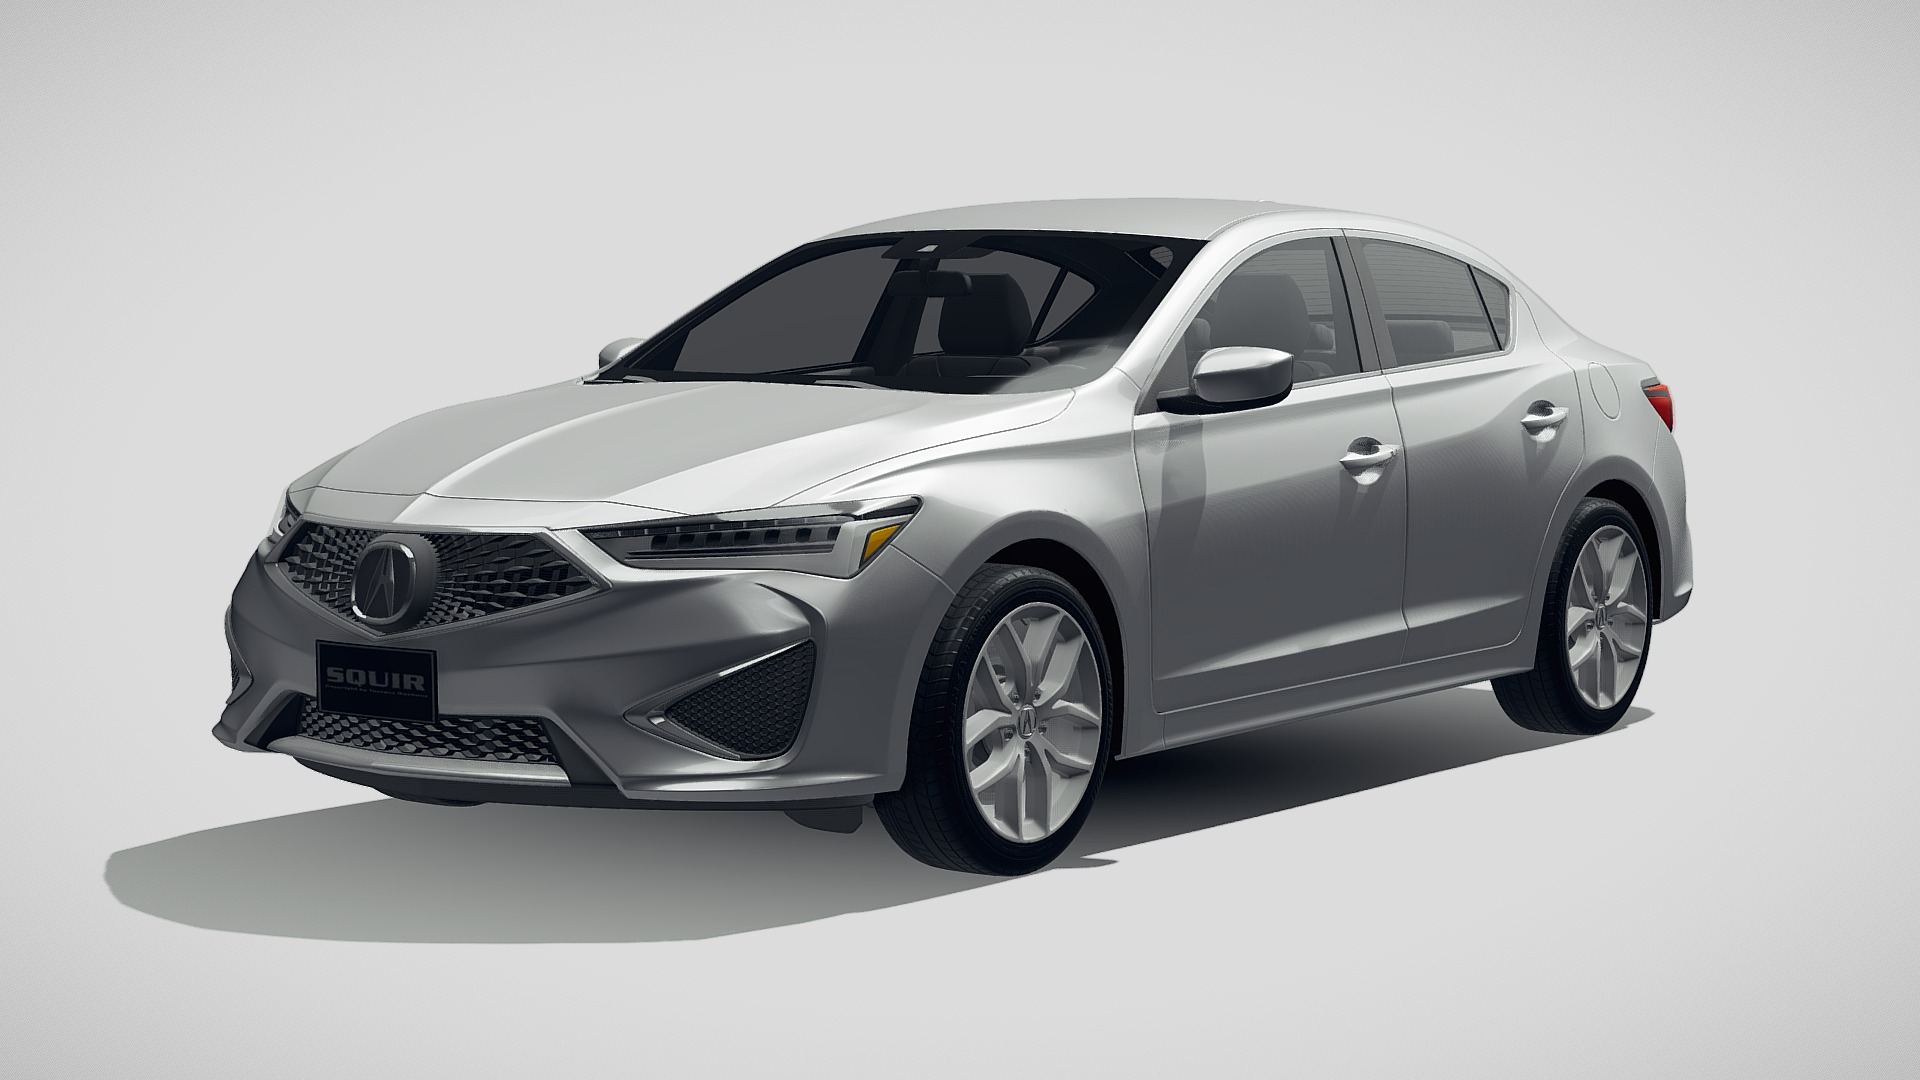 3D model Acura ILX 2019 - This is a 3D model of the Acura ILX 2019. The 3D model is about a silver car with a white background.